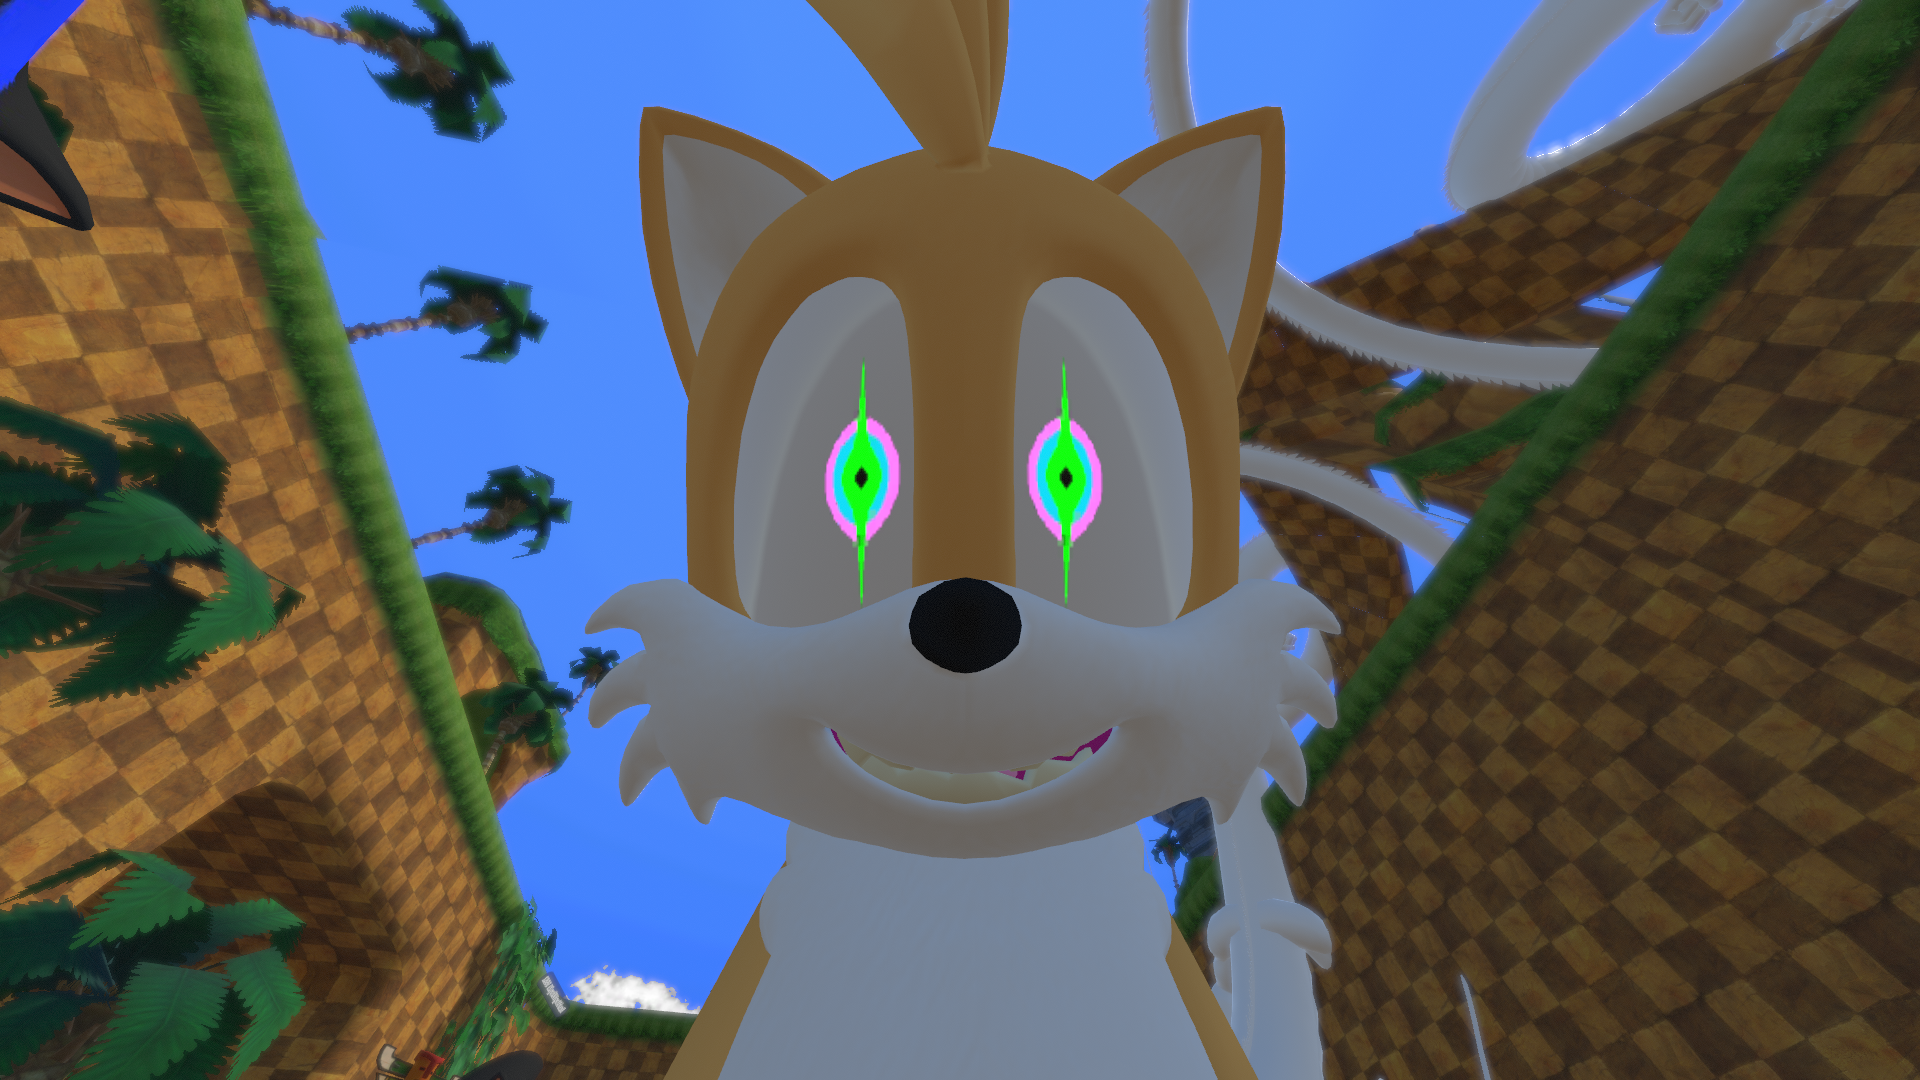 Super Tails Fights Tails.EXE! [Feat: Silver] (VR Chat) 